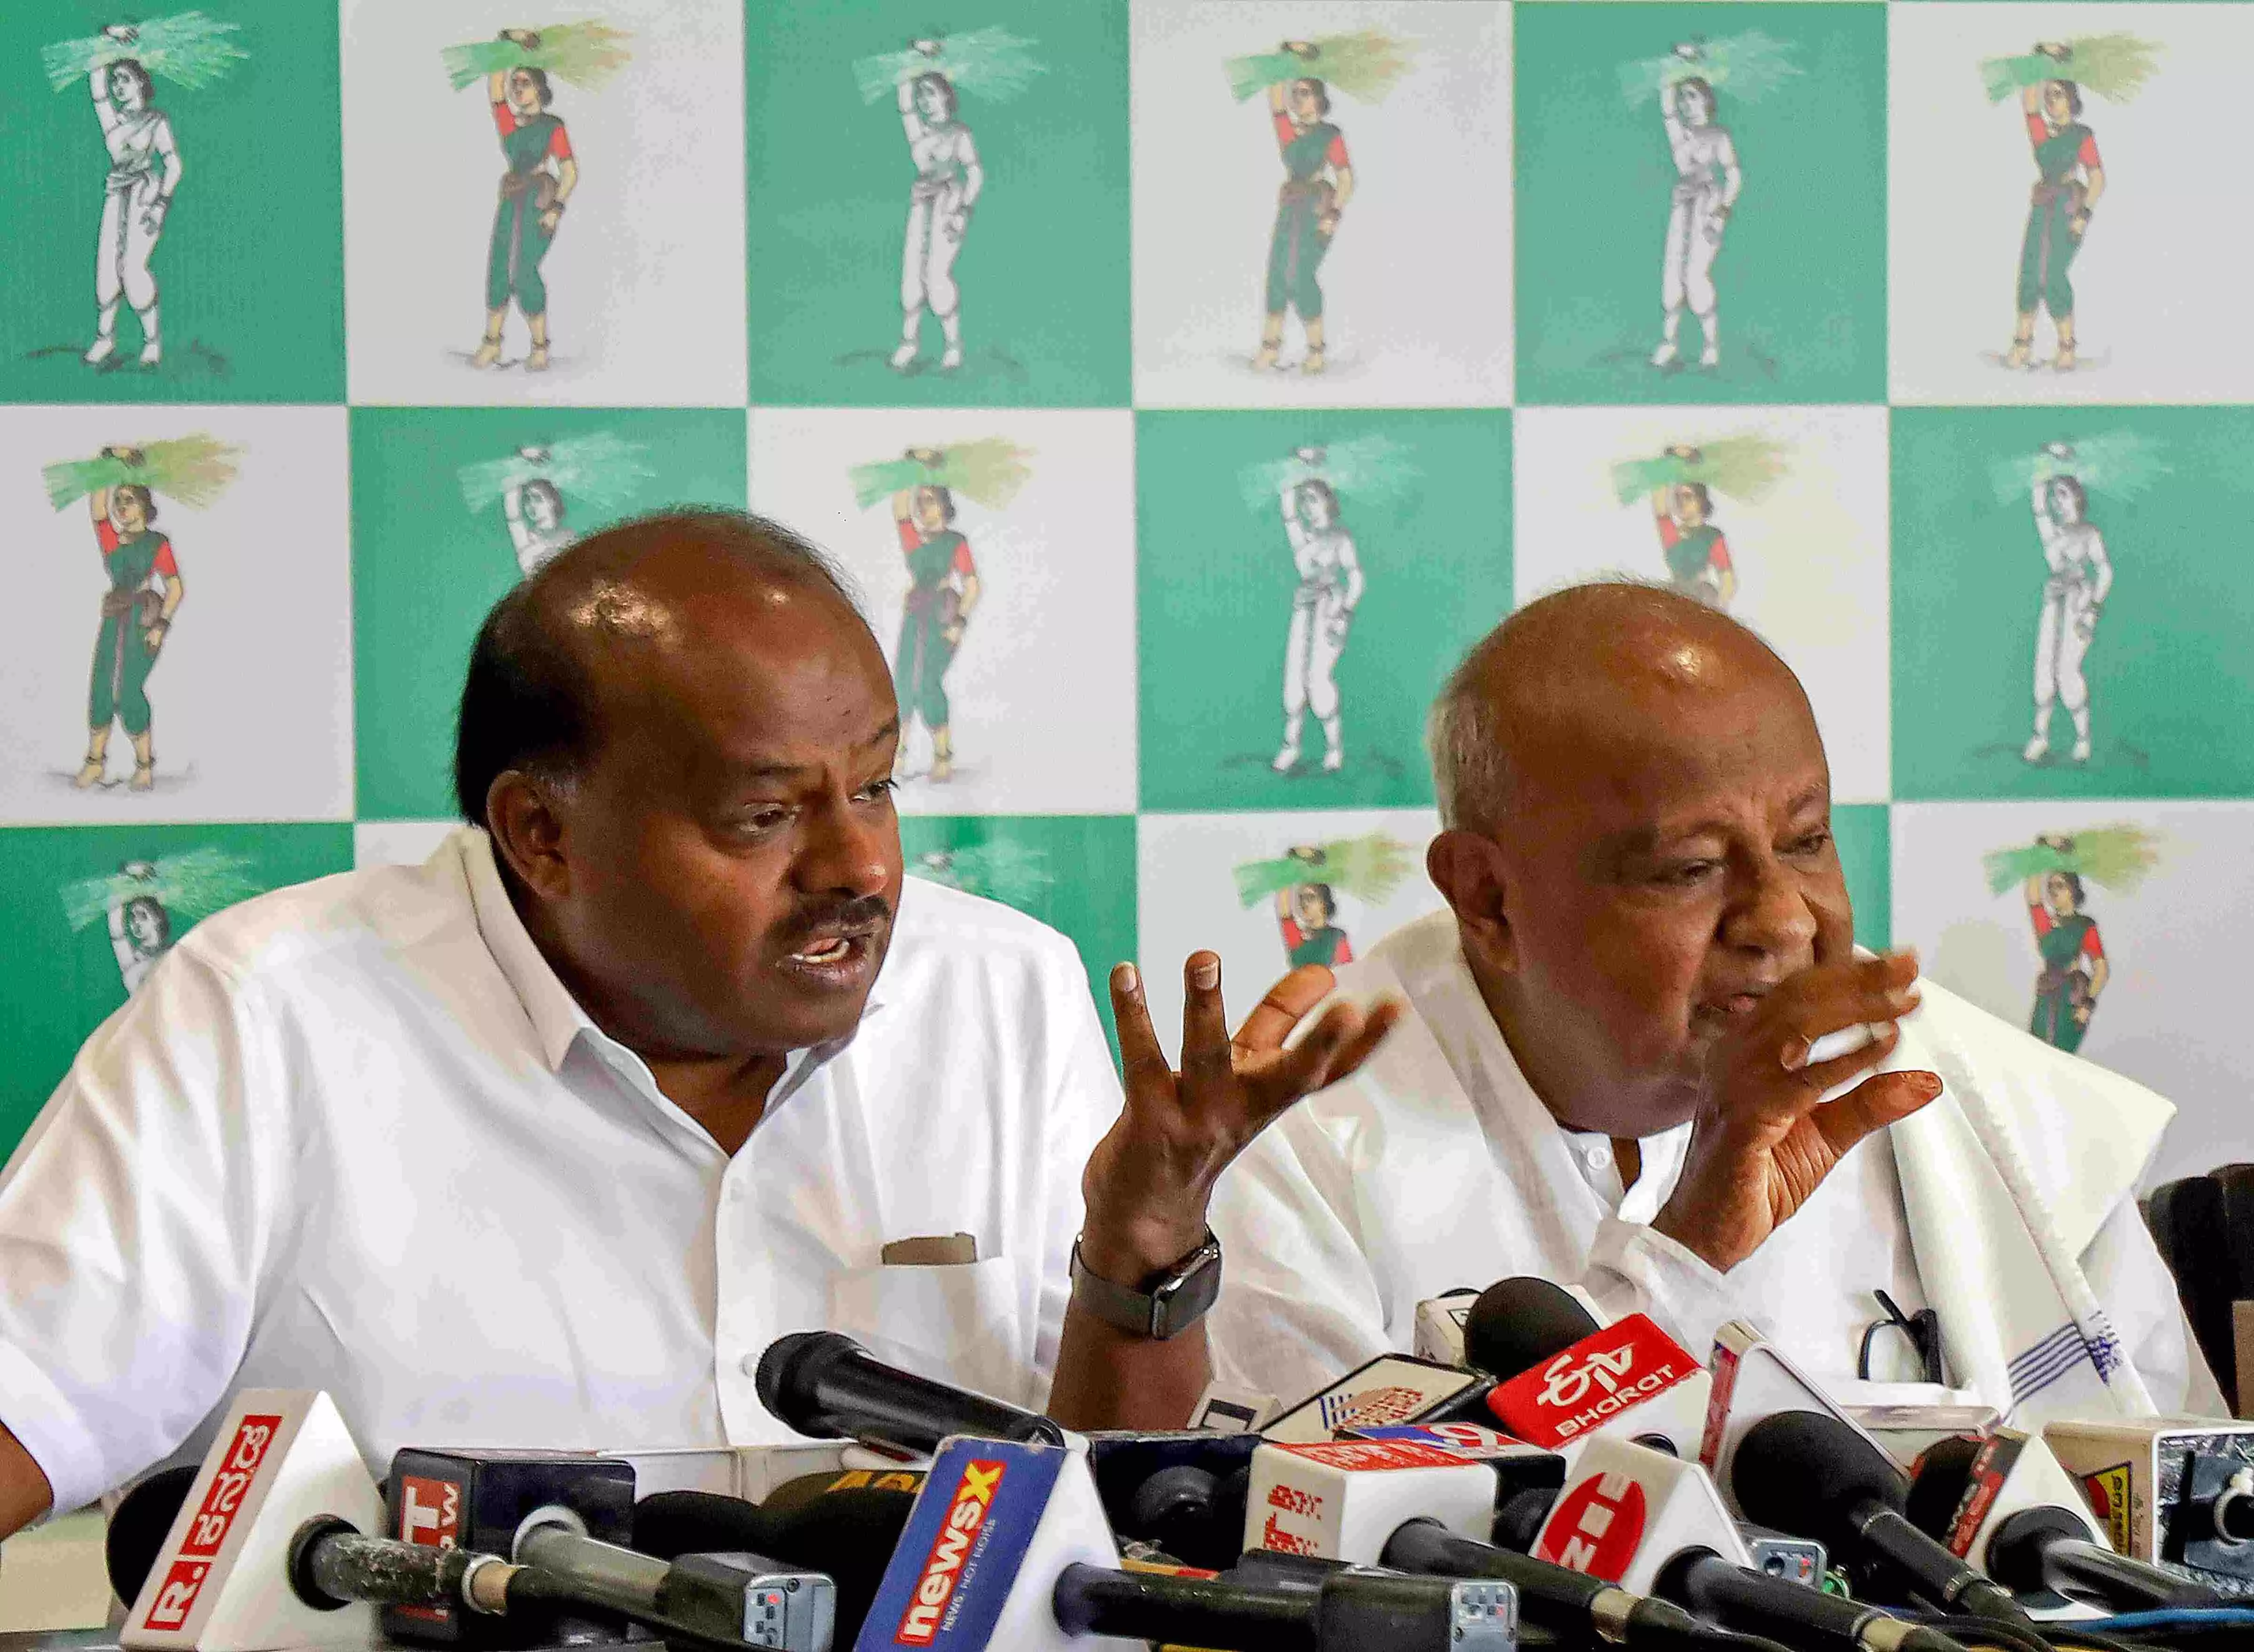 Cauvery row intensifies as various outfits call for bandh; Deve Gowda seeks setting up external agency to study states reservoirs